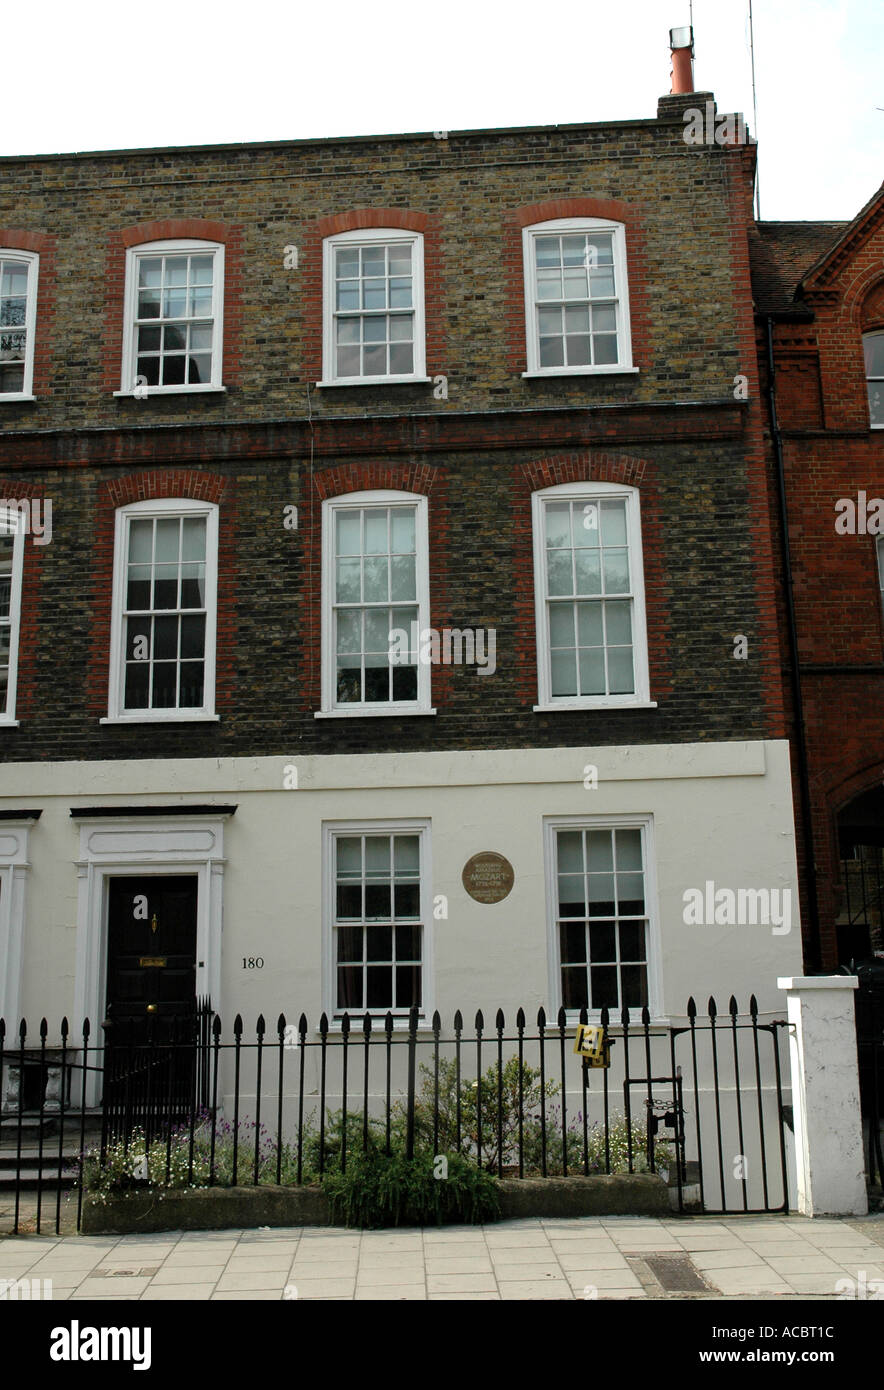 HOUSE WHERE MOZART LIVED WHILE IN LONDON Stock Photo